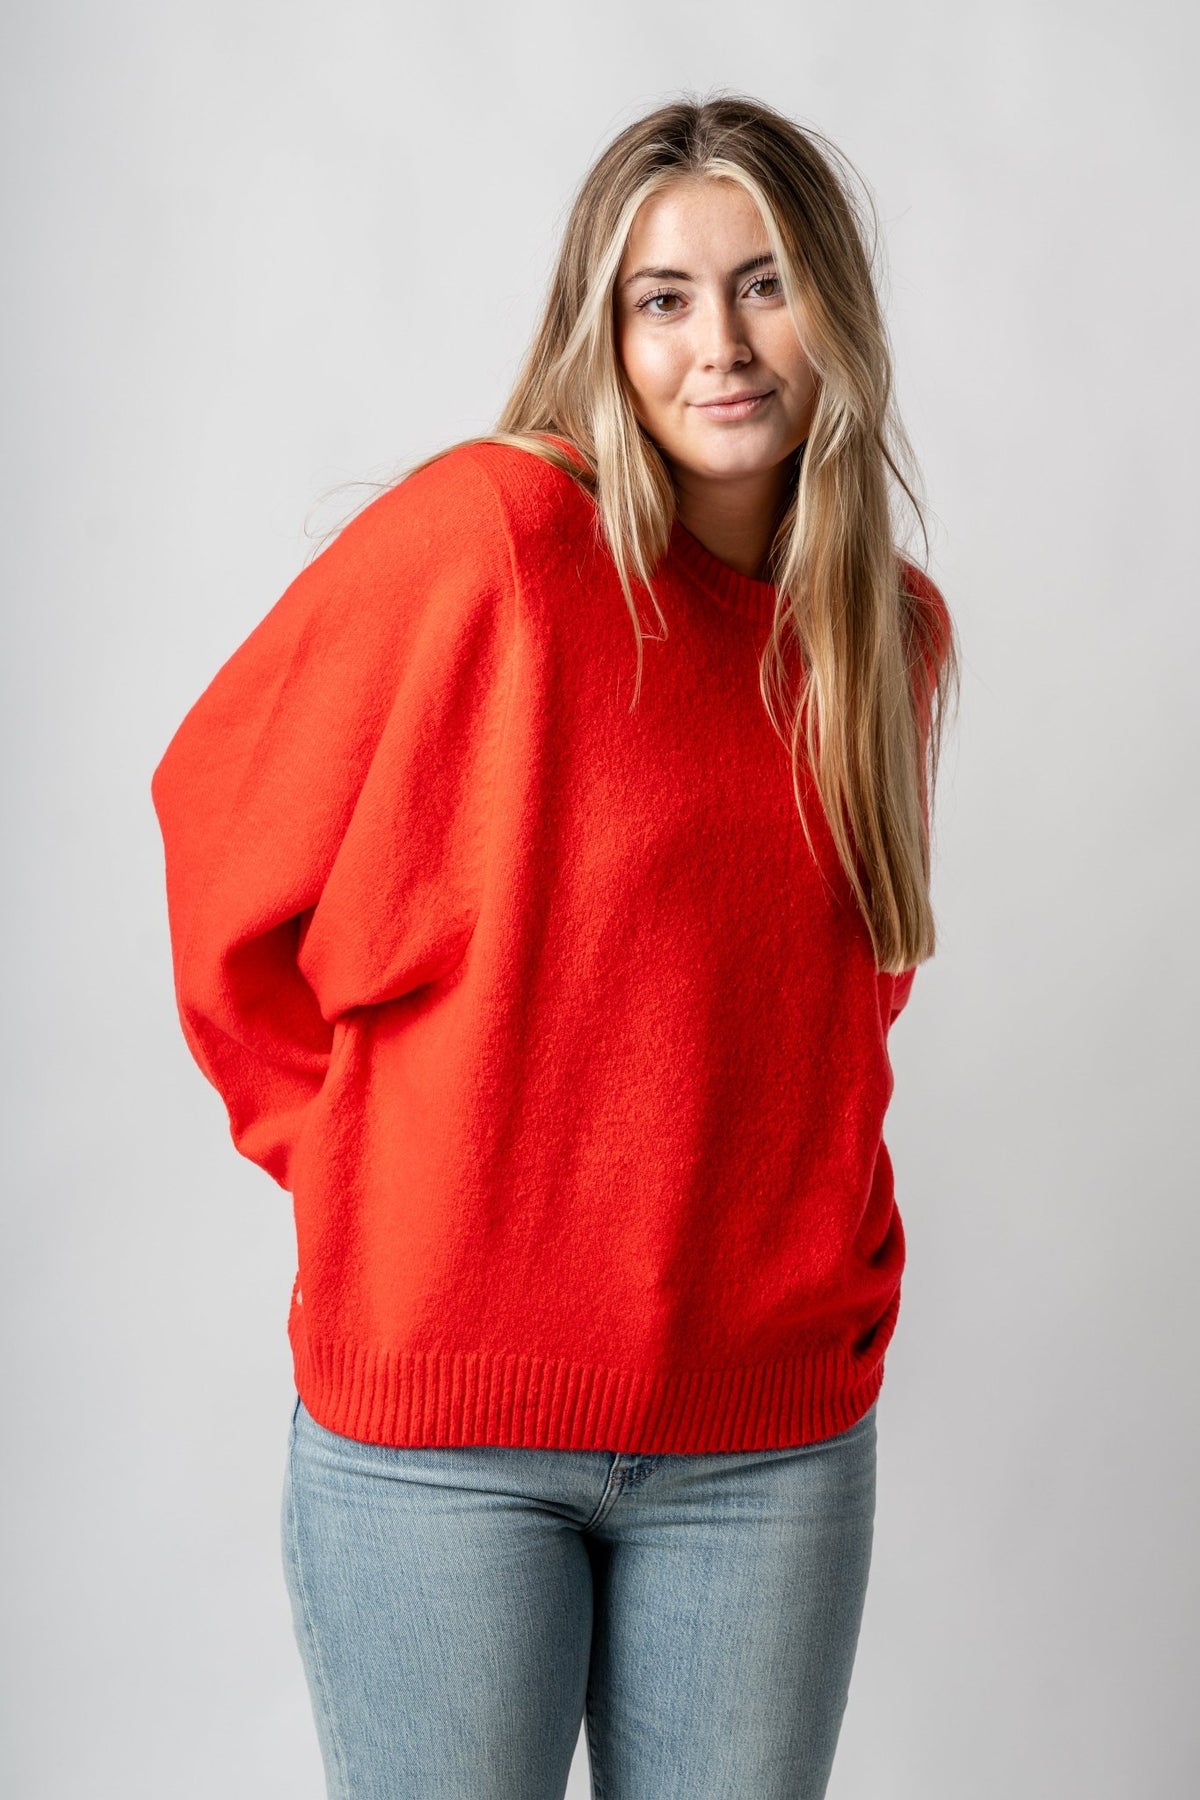 Oversized crew sweater red – Boutique Sweaters | Fashionable Sweaters at Lush Fashion Lounge Boutique in Oklahoma City